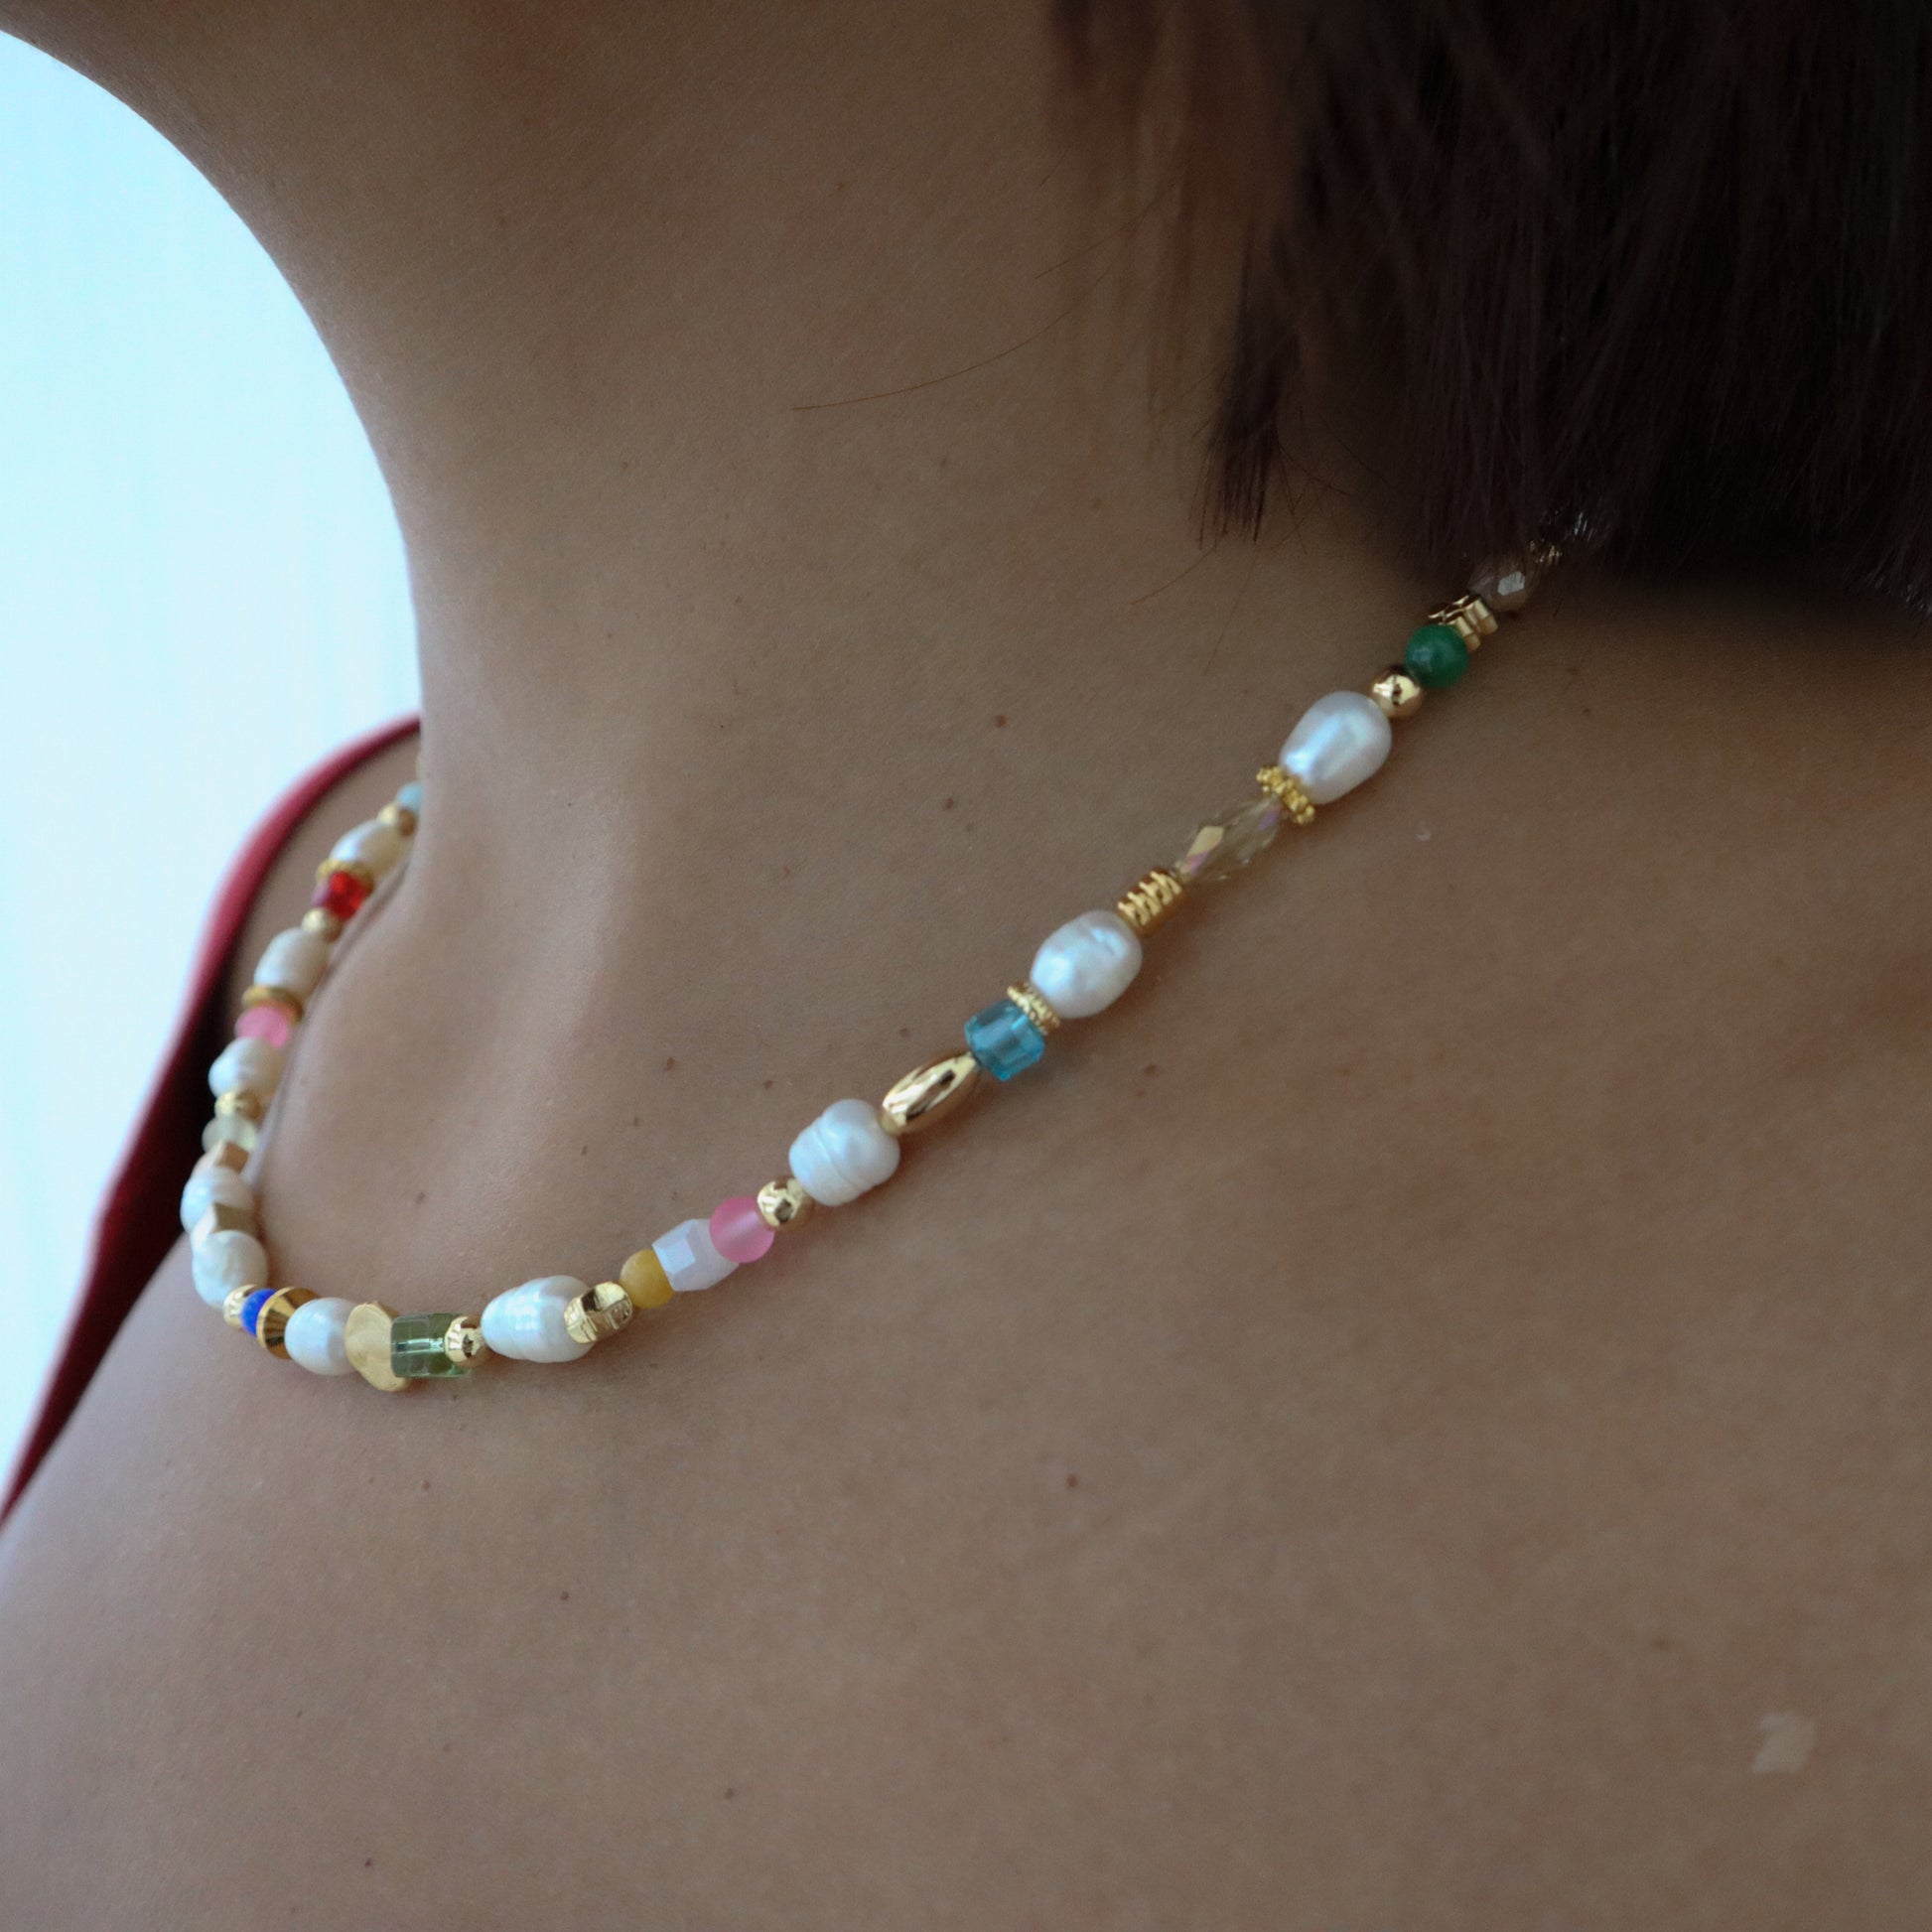 Roop Jewelry Fête Necklace. Holiday party necklace made in Oakland, Ca. Colorful beaded gemstone and pearl necklace. 